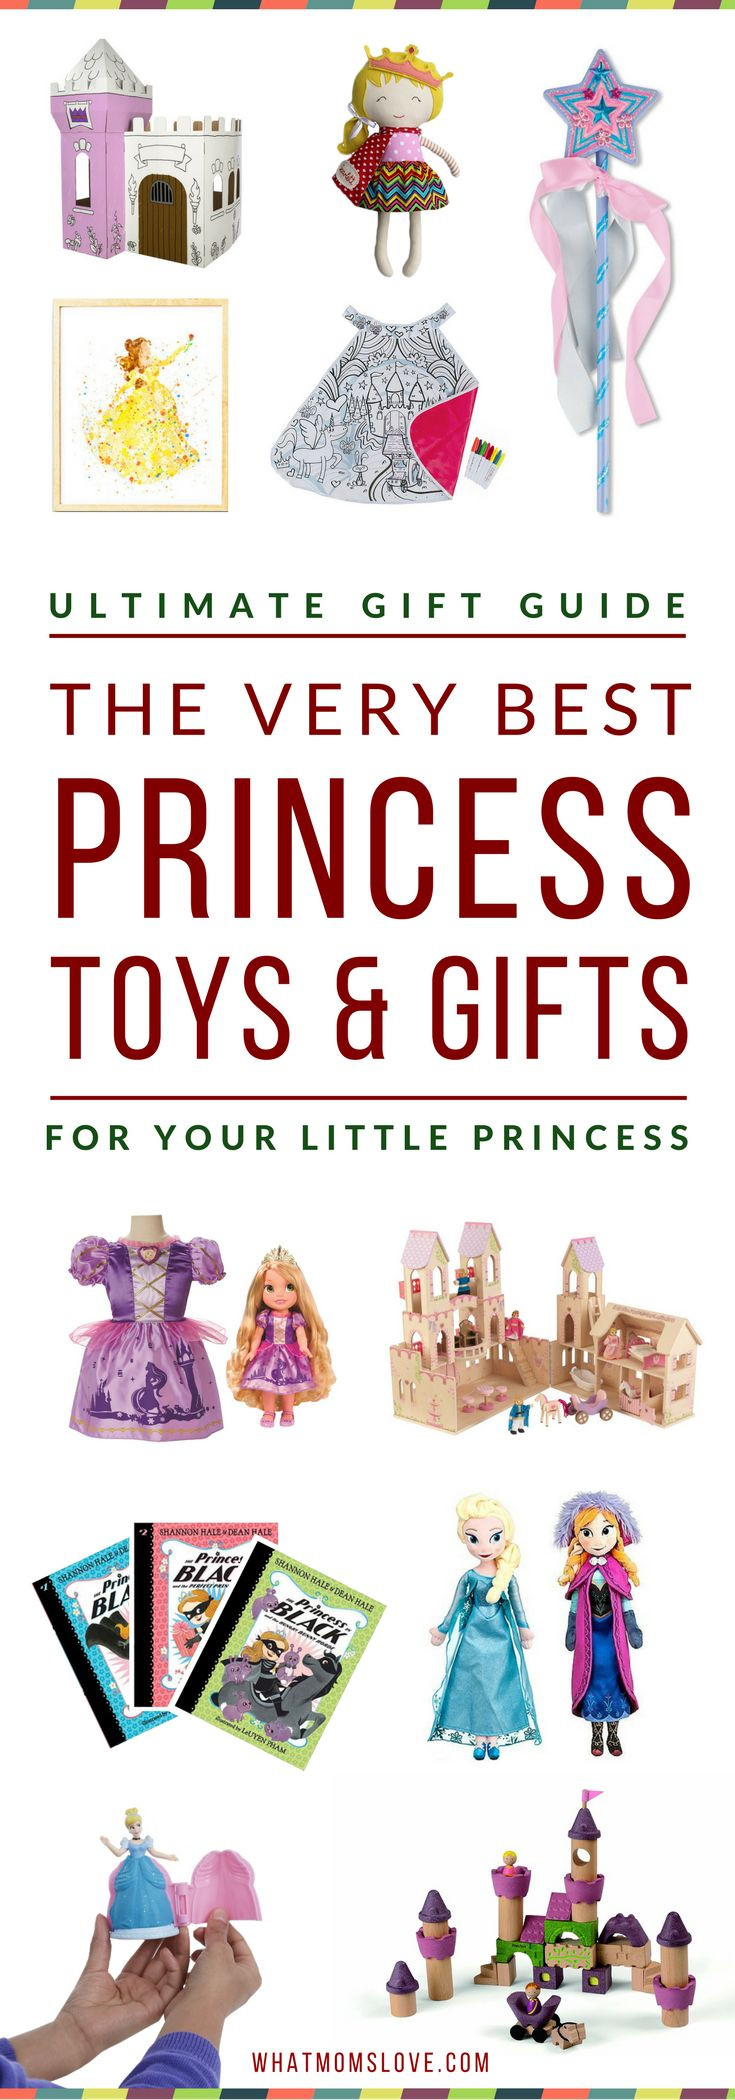 Disney Gift Ideas For Girlfriend
 1000 images about Gift ideas on Pinterest